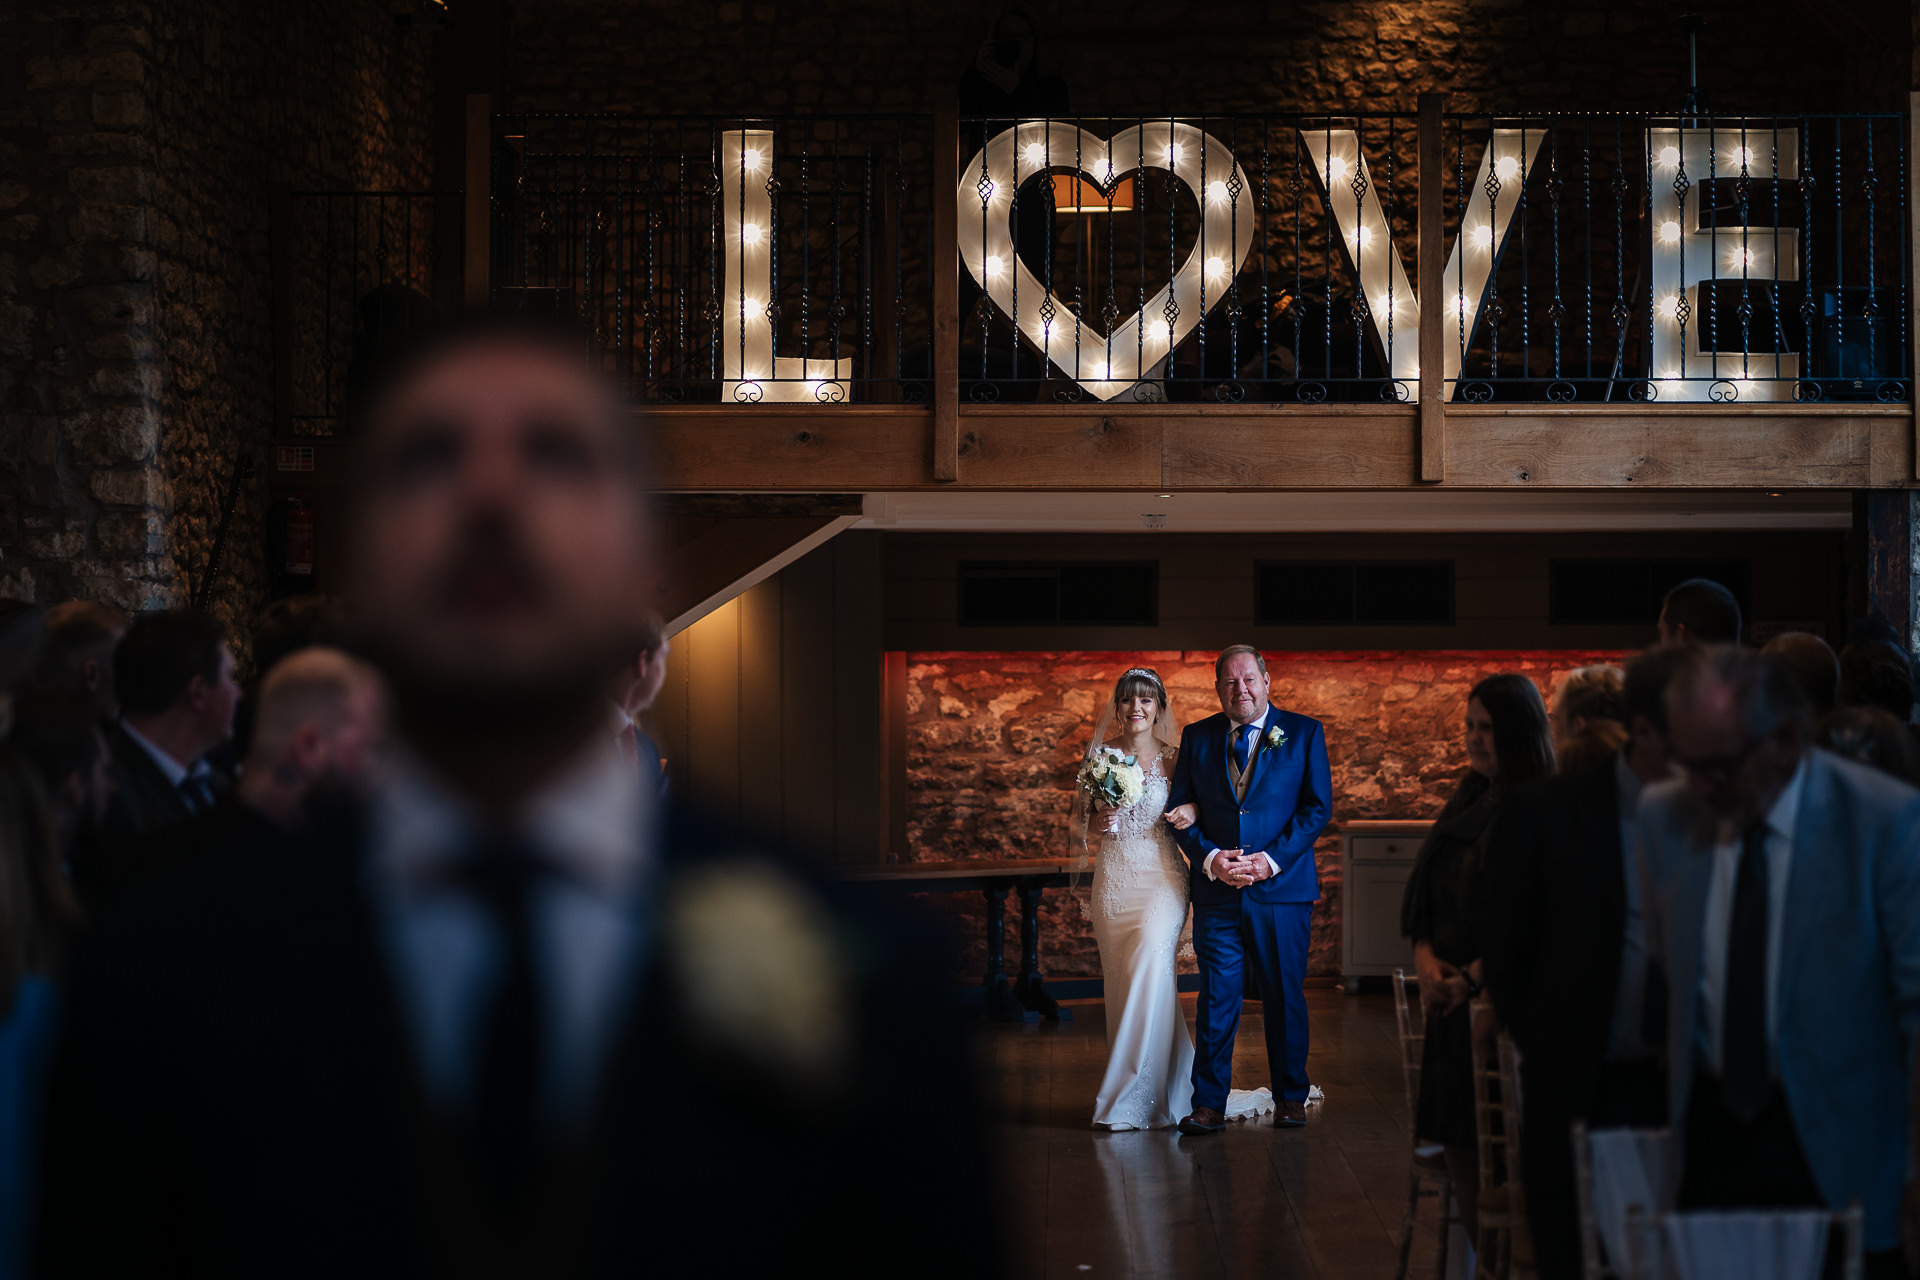 A bride and groom walking down the aisle in front of a lit up love sign.